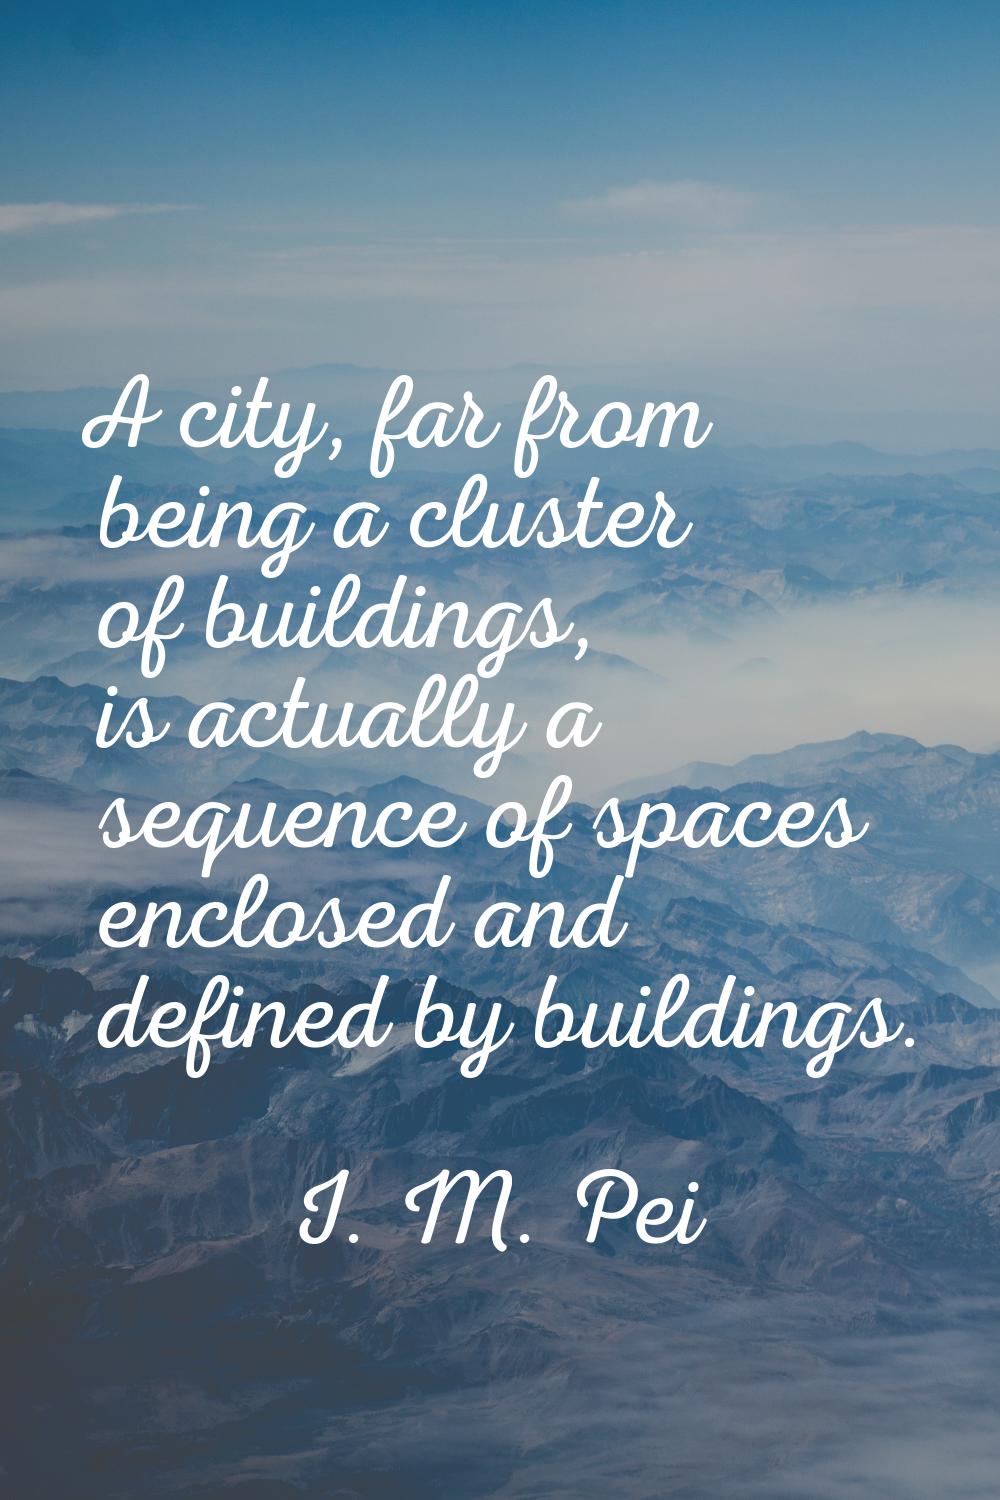 A city, far from being a cluster of buildings, is actually a sequence of spaces enclosed and define